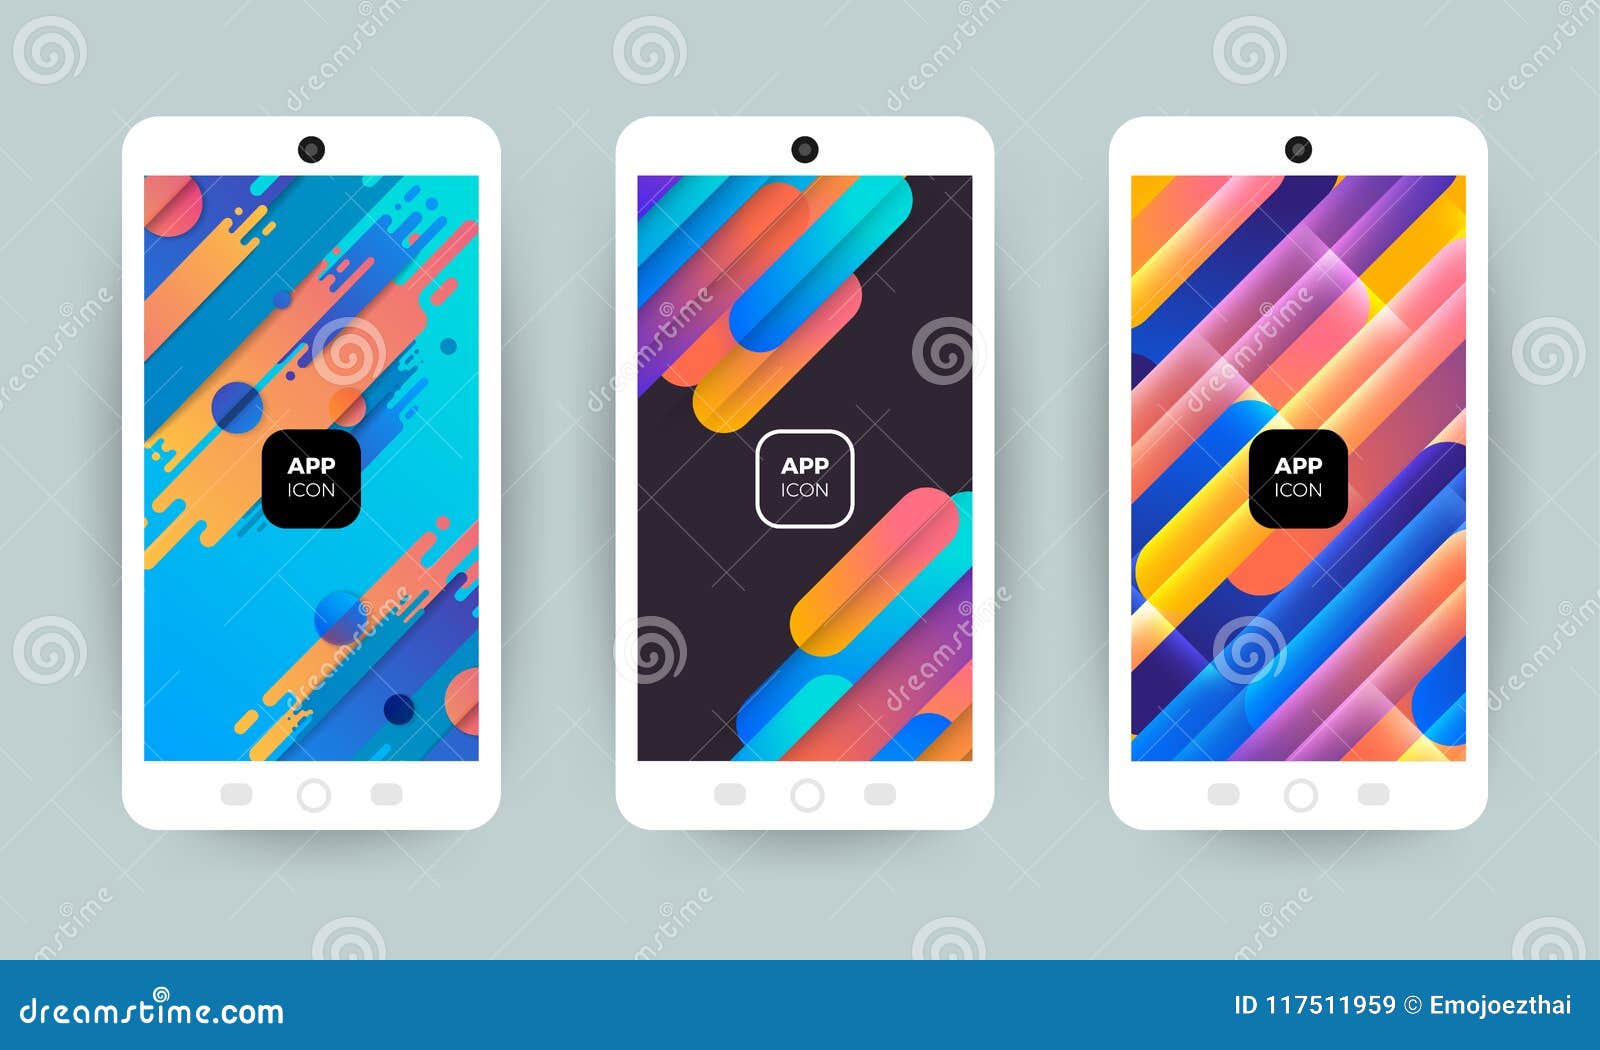 Android/iOS App Splash Screen: Best Practices and Design Tips